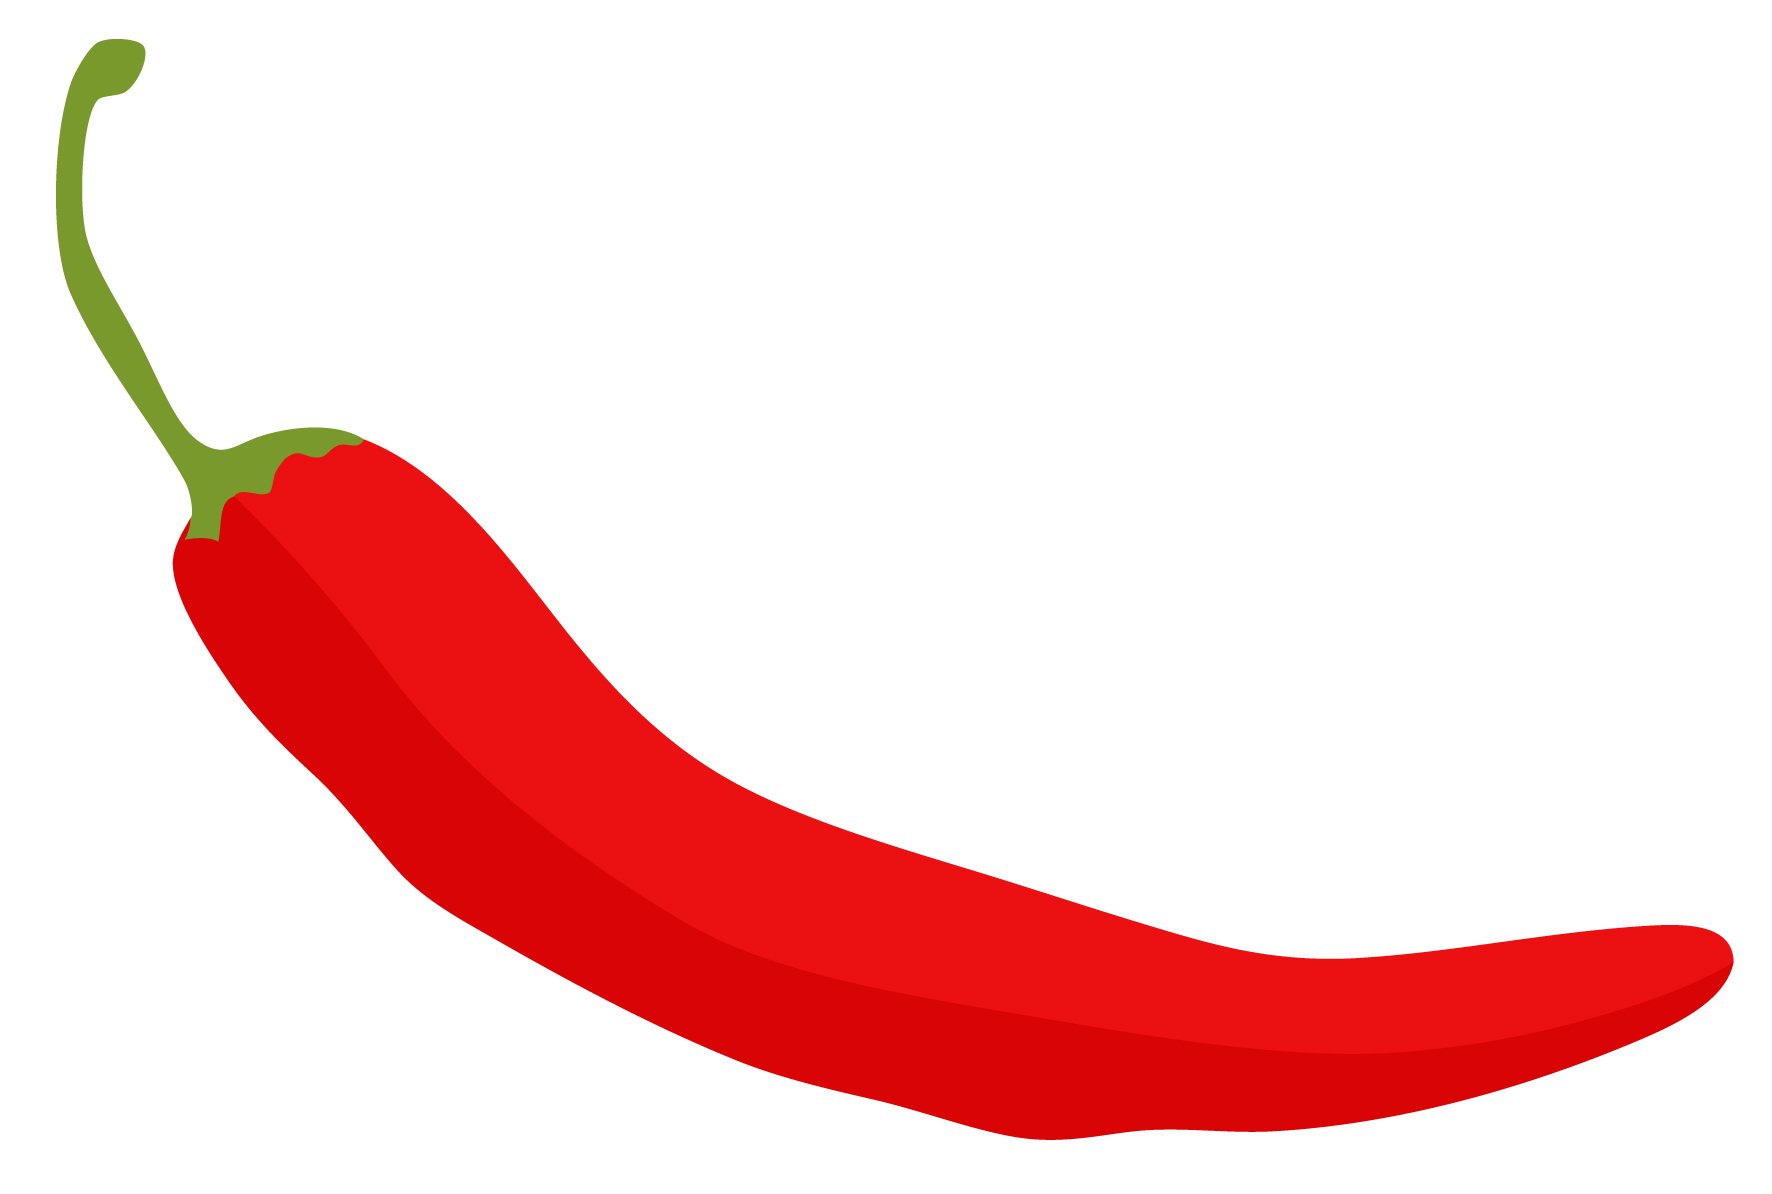 Chili Peppers Clip Art 